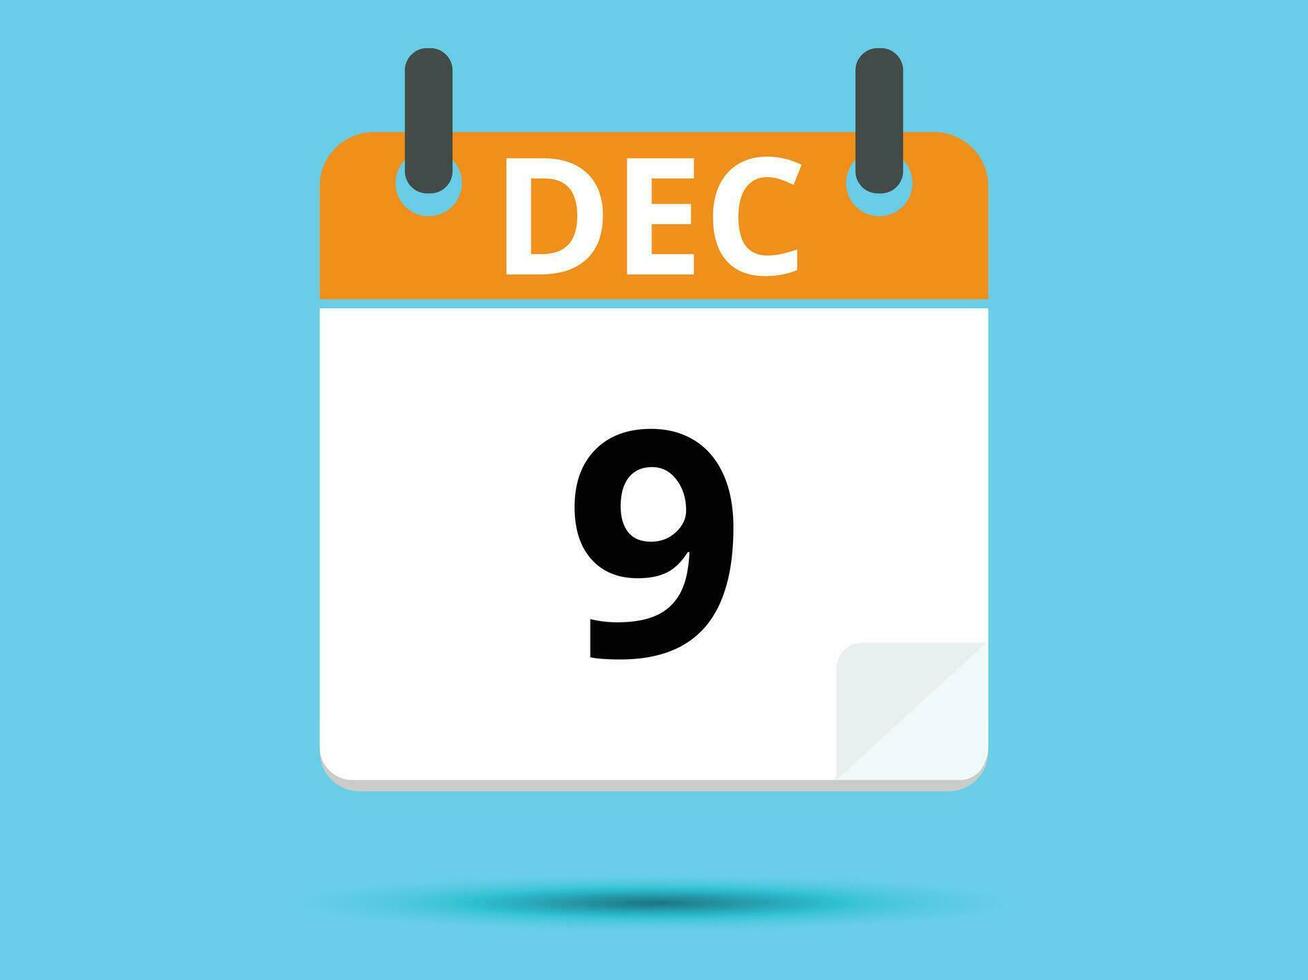 9 December. Flat icon calendar isolated on blue background. Vector illustration.